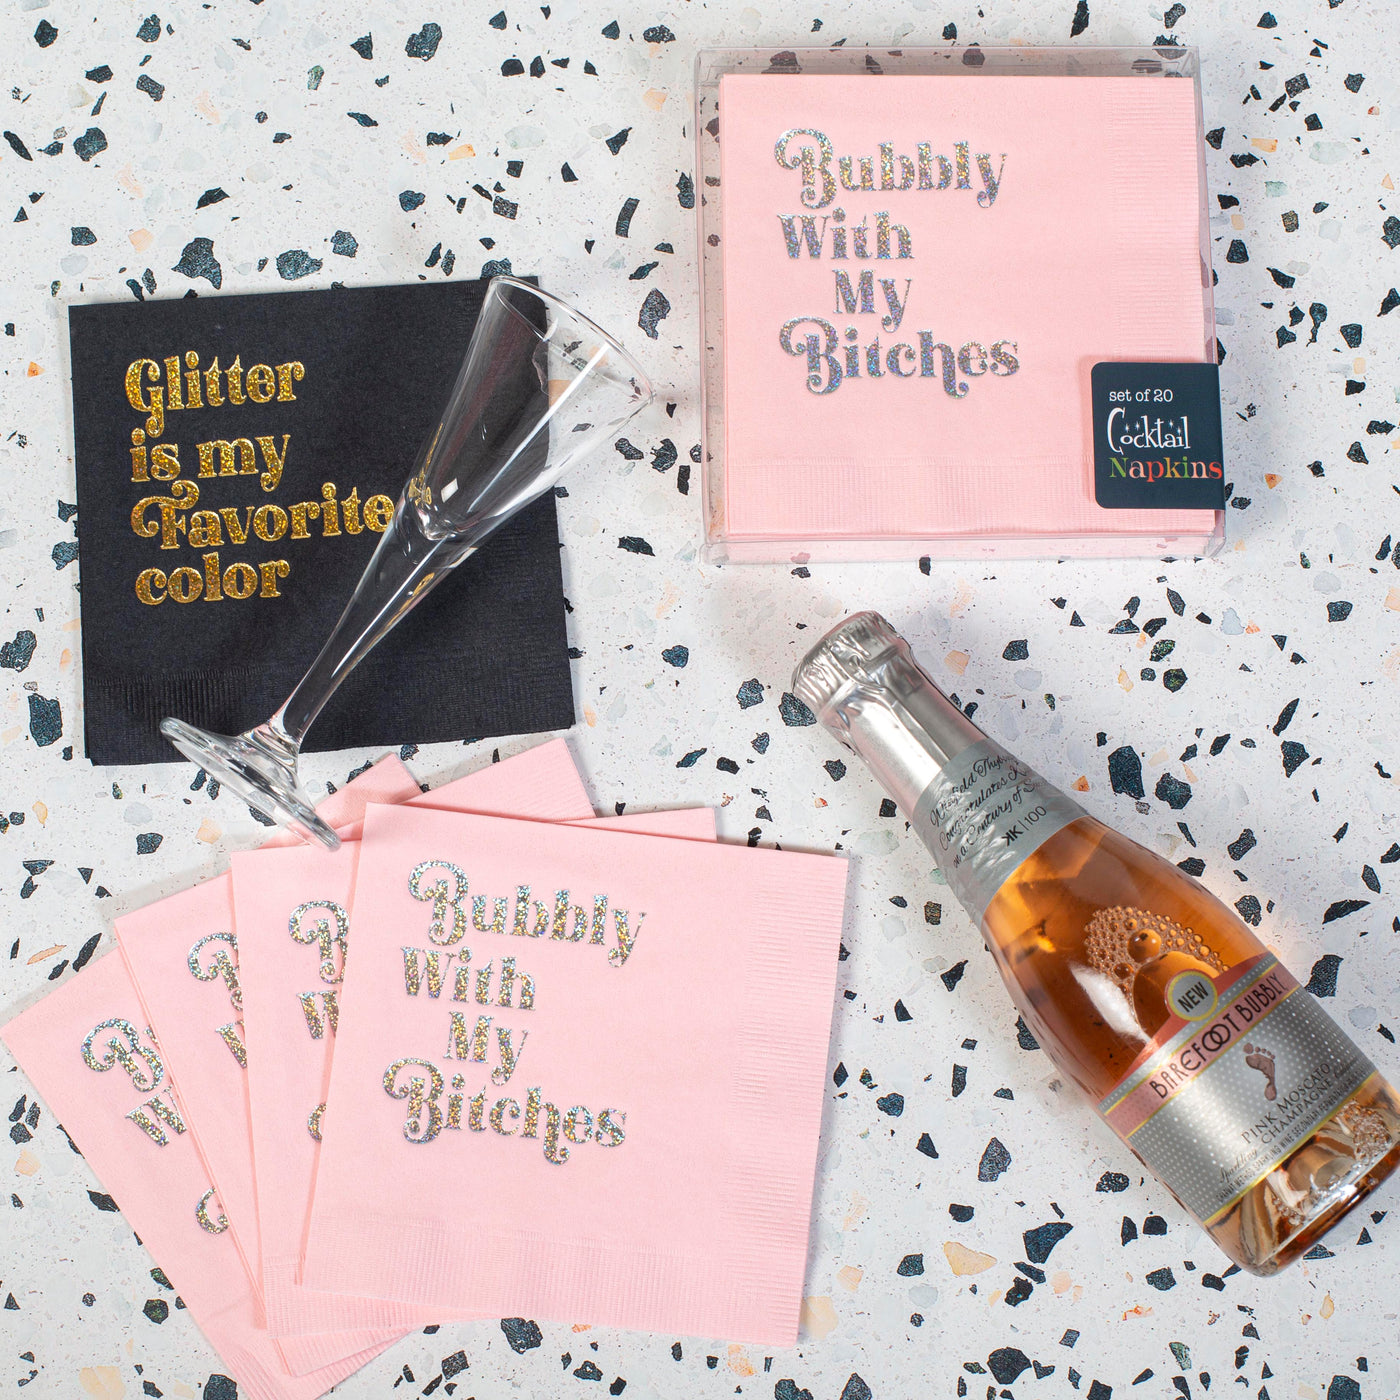 girls night out bachelorette bubbly with my bitches silver glitter foil on pink 3 ply cocktail beverage napkin